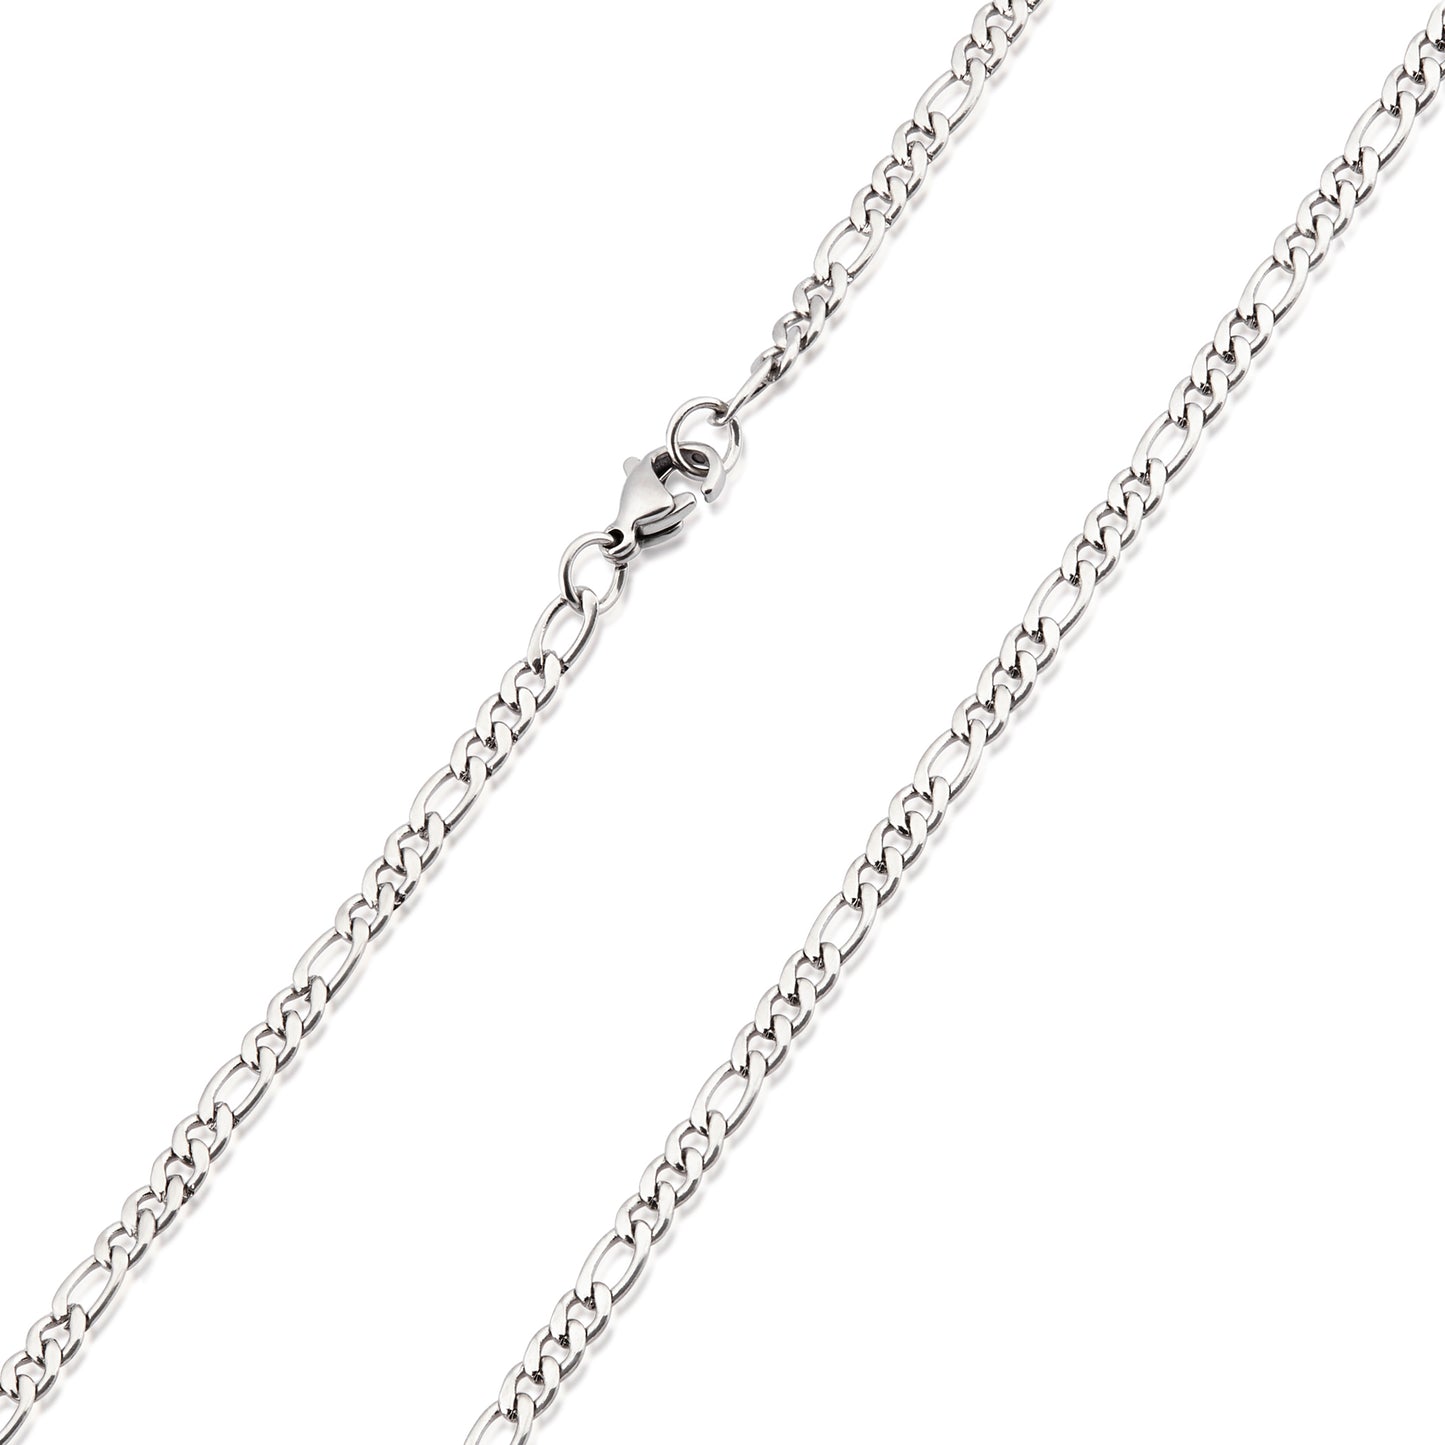 Men's Polished Figaro Chain Stainless Steel Necklace